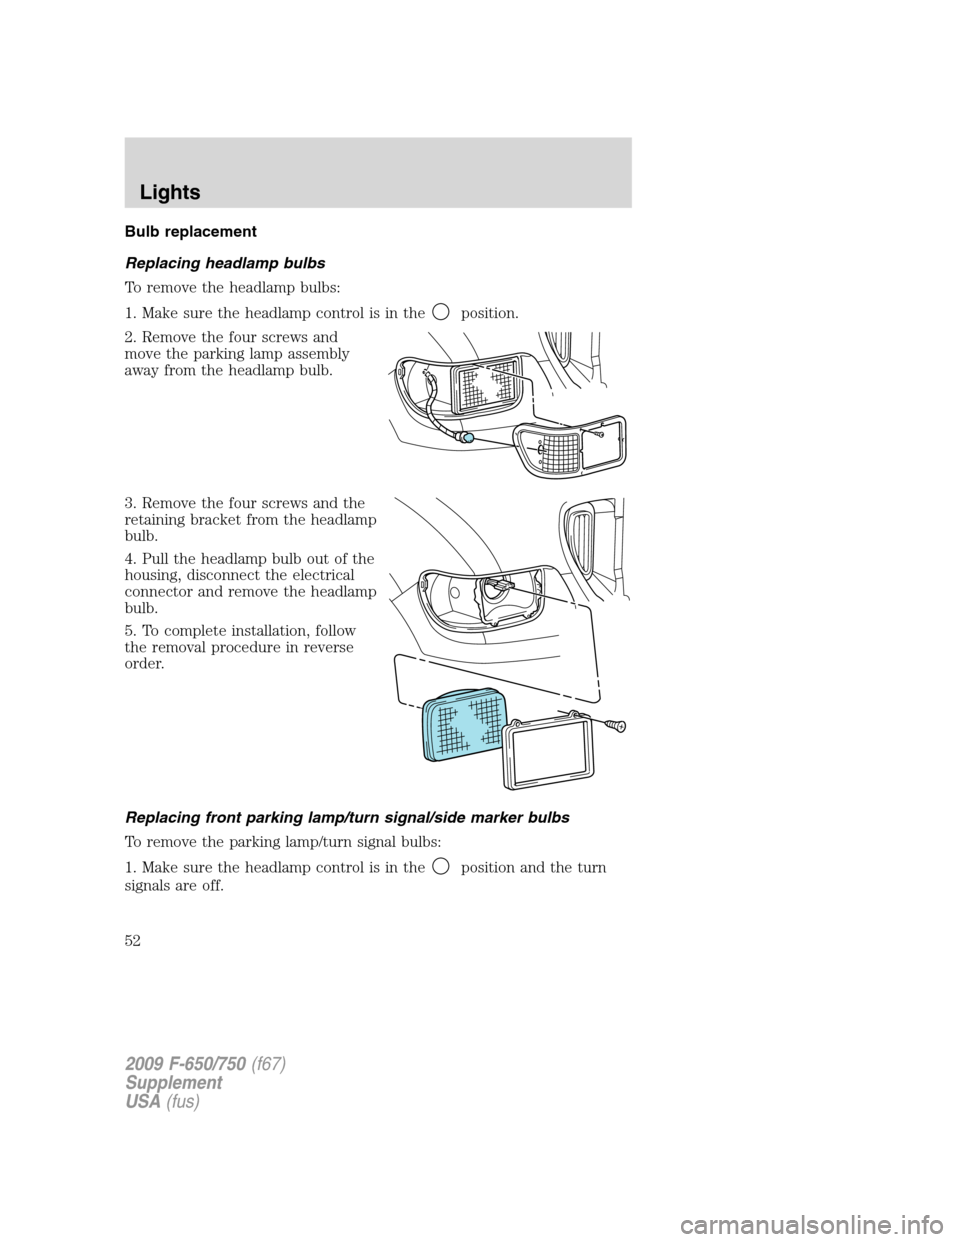 FORD F650 2009 12.G Owners Manual Bulb replacement
Replacing headlamp bulbs
To remove the headlamp bulbs:
1. Make sure the headlamp control is in the
position.
2. Remove the four screws and
move the parking lamp assembly
away from the